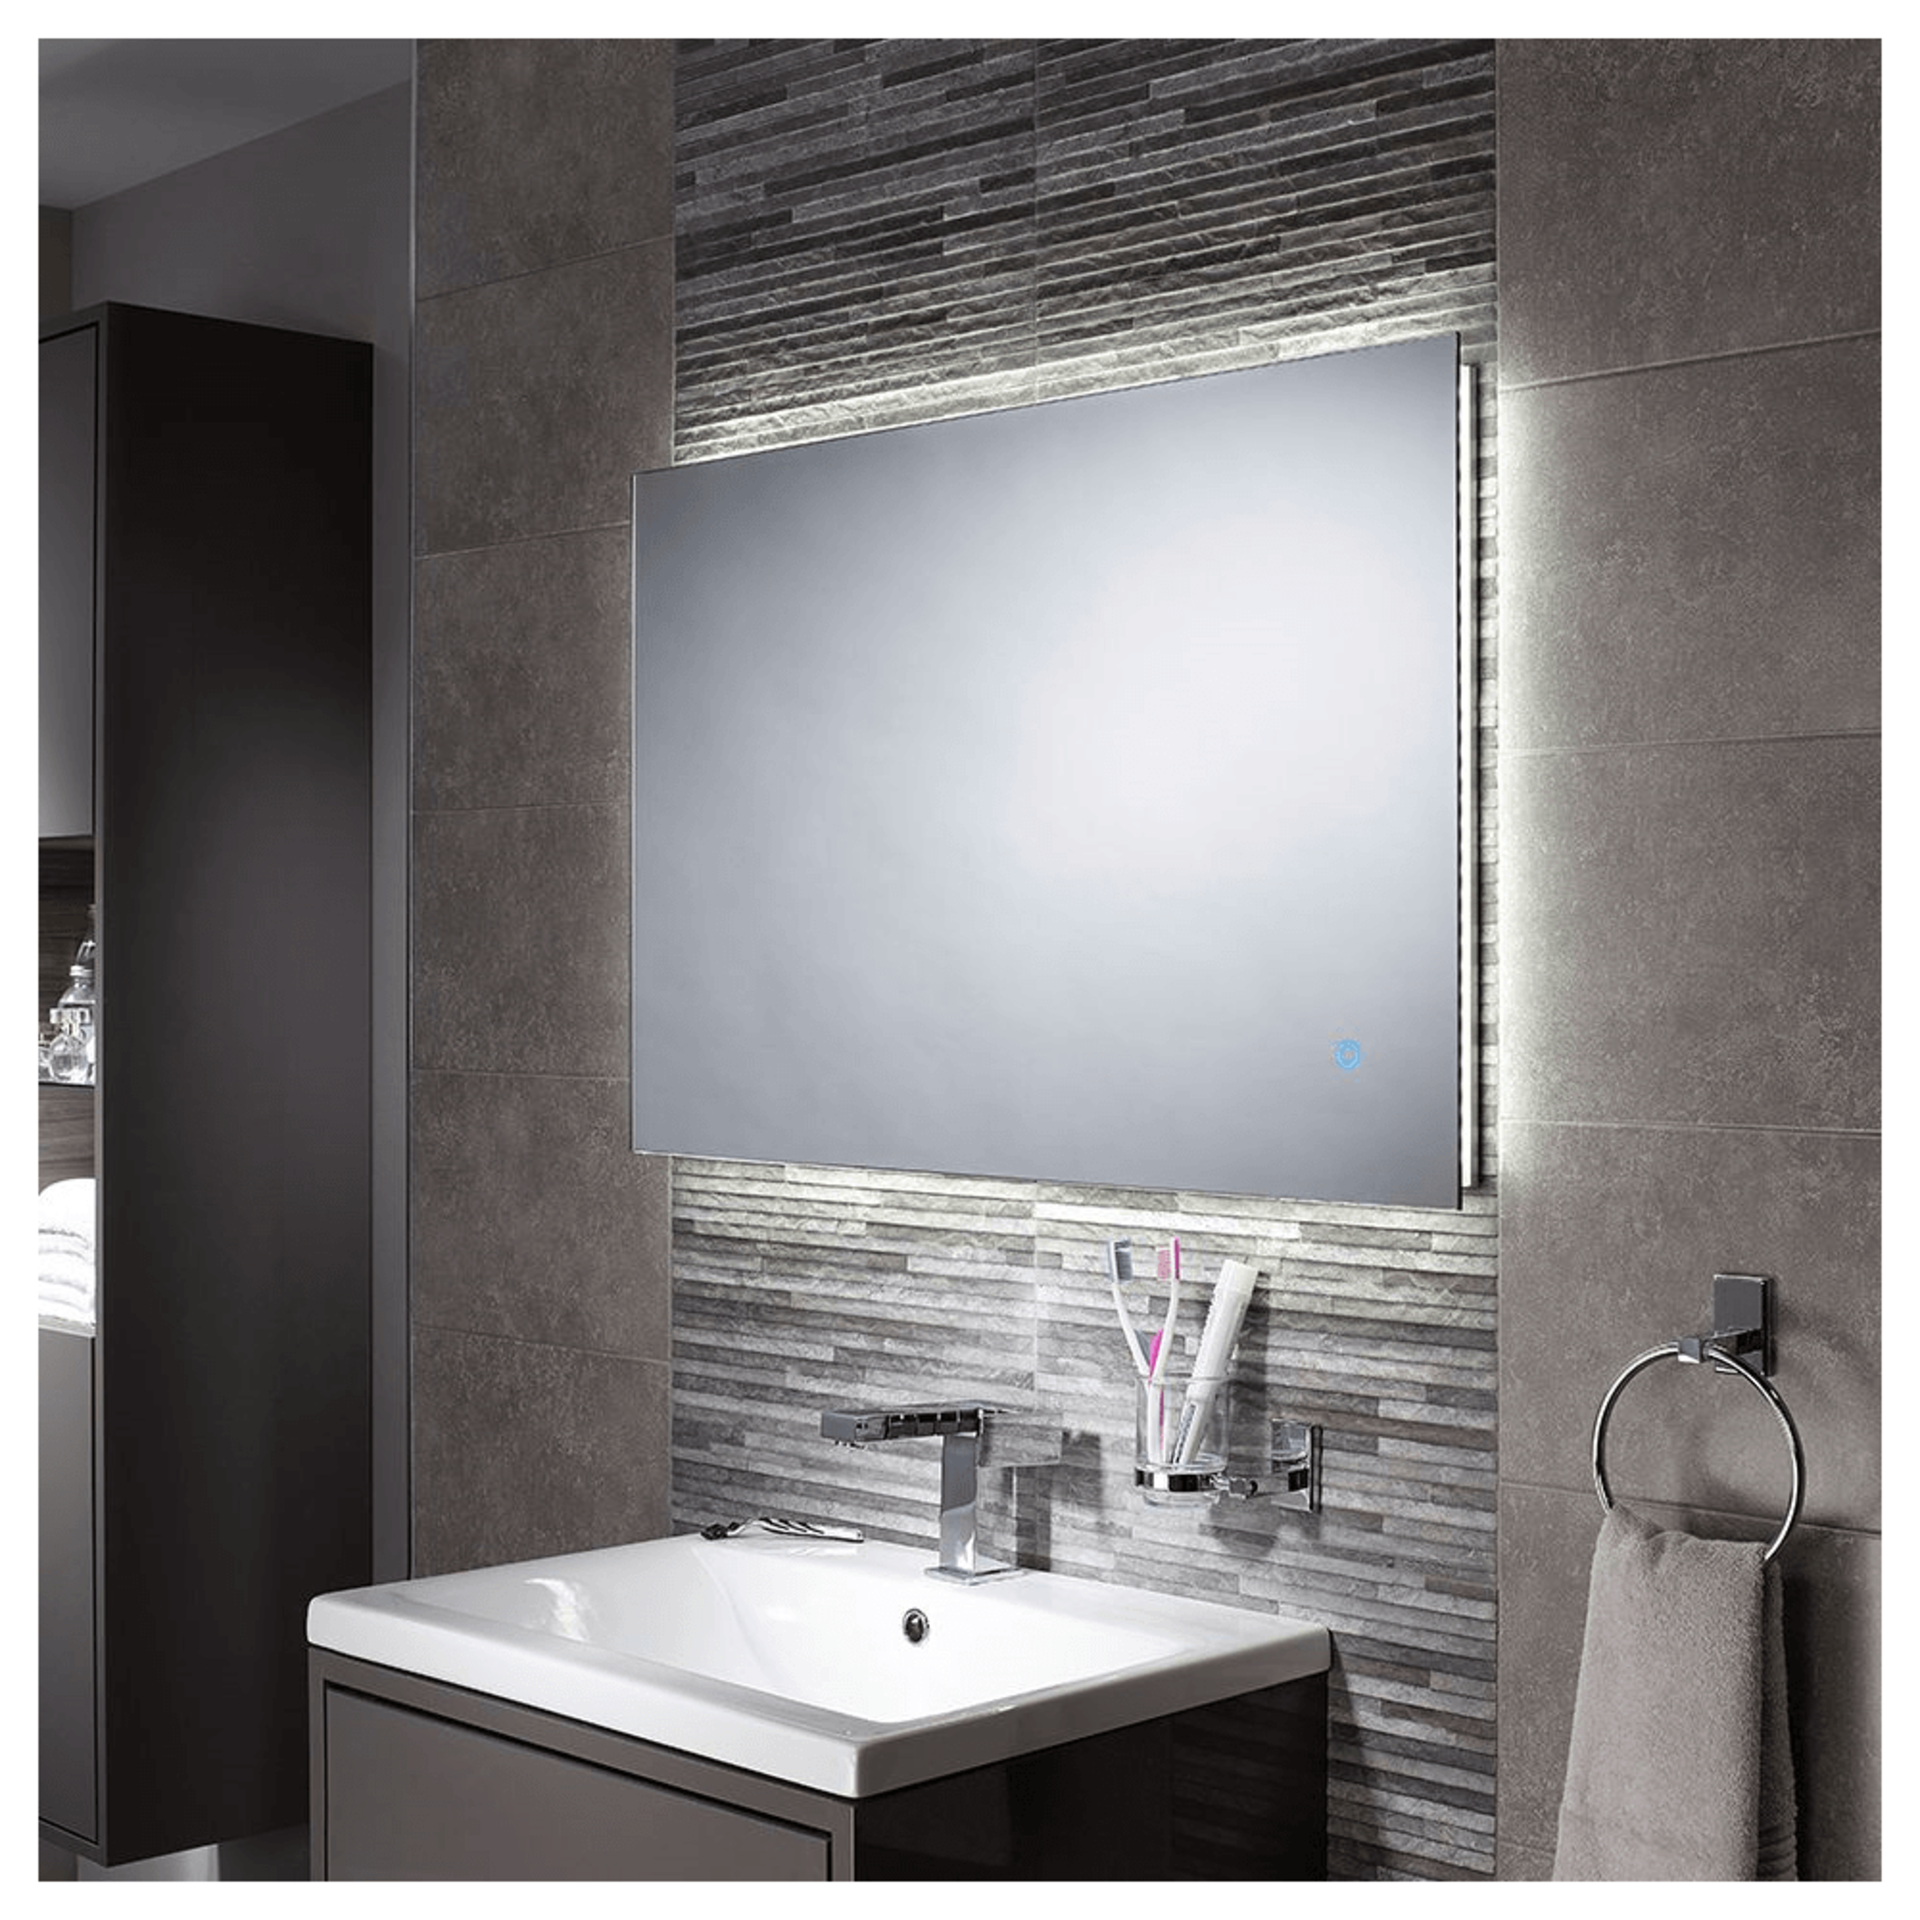 New (Y16) Eden Se30756C0 Backlit Led Mirror. RRP £443.21. Dimensions: H 600 x W 900mm Wattage... - Image 4 of 4